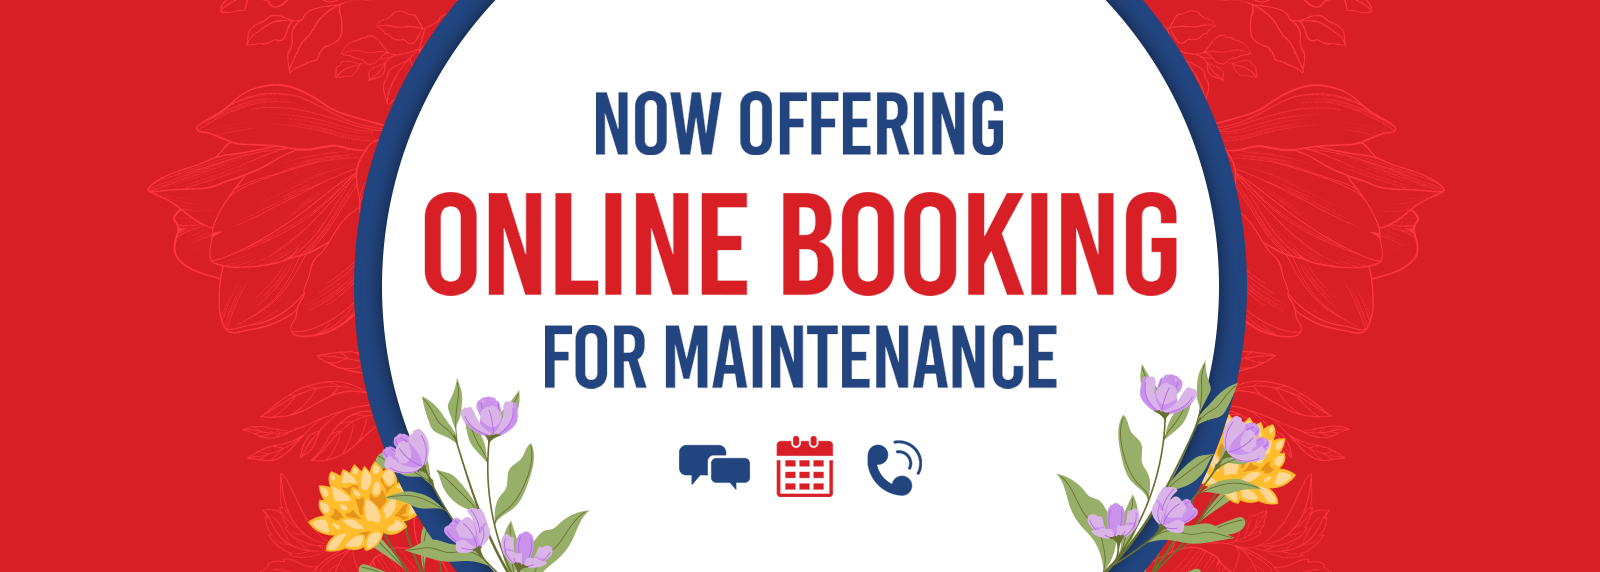 Now Offering Book Online for Maintenance